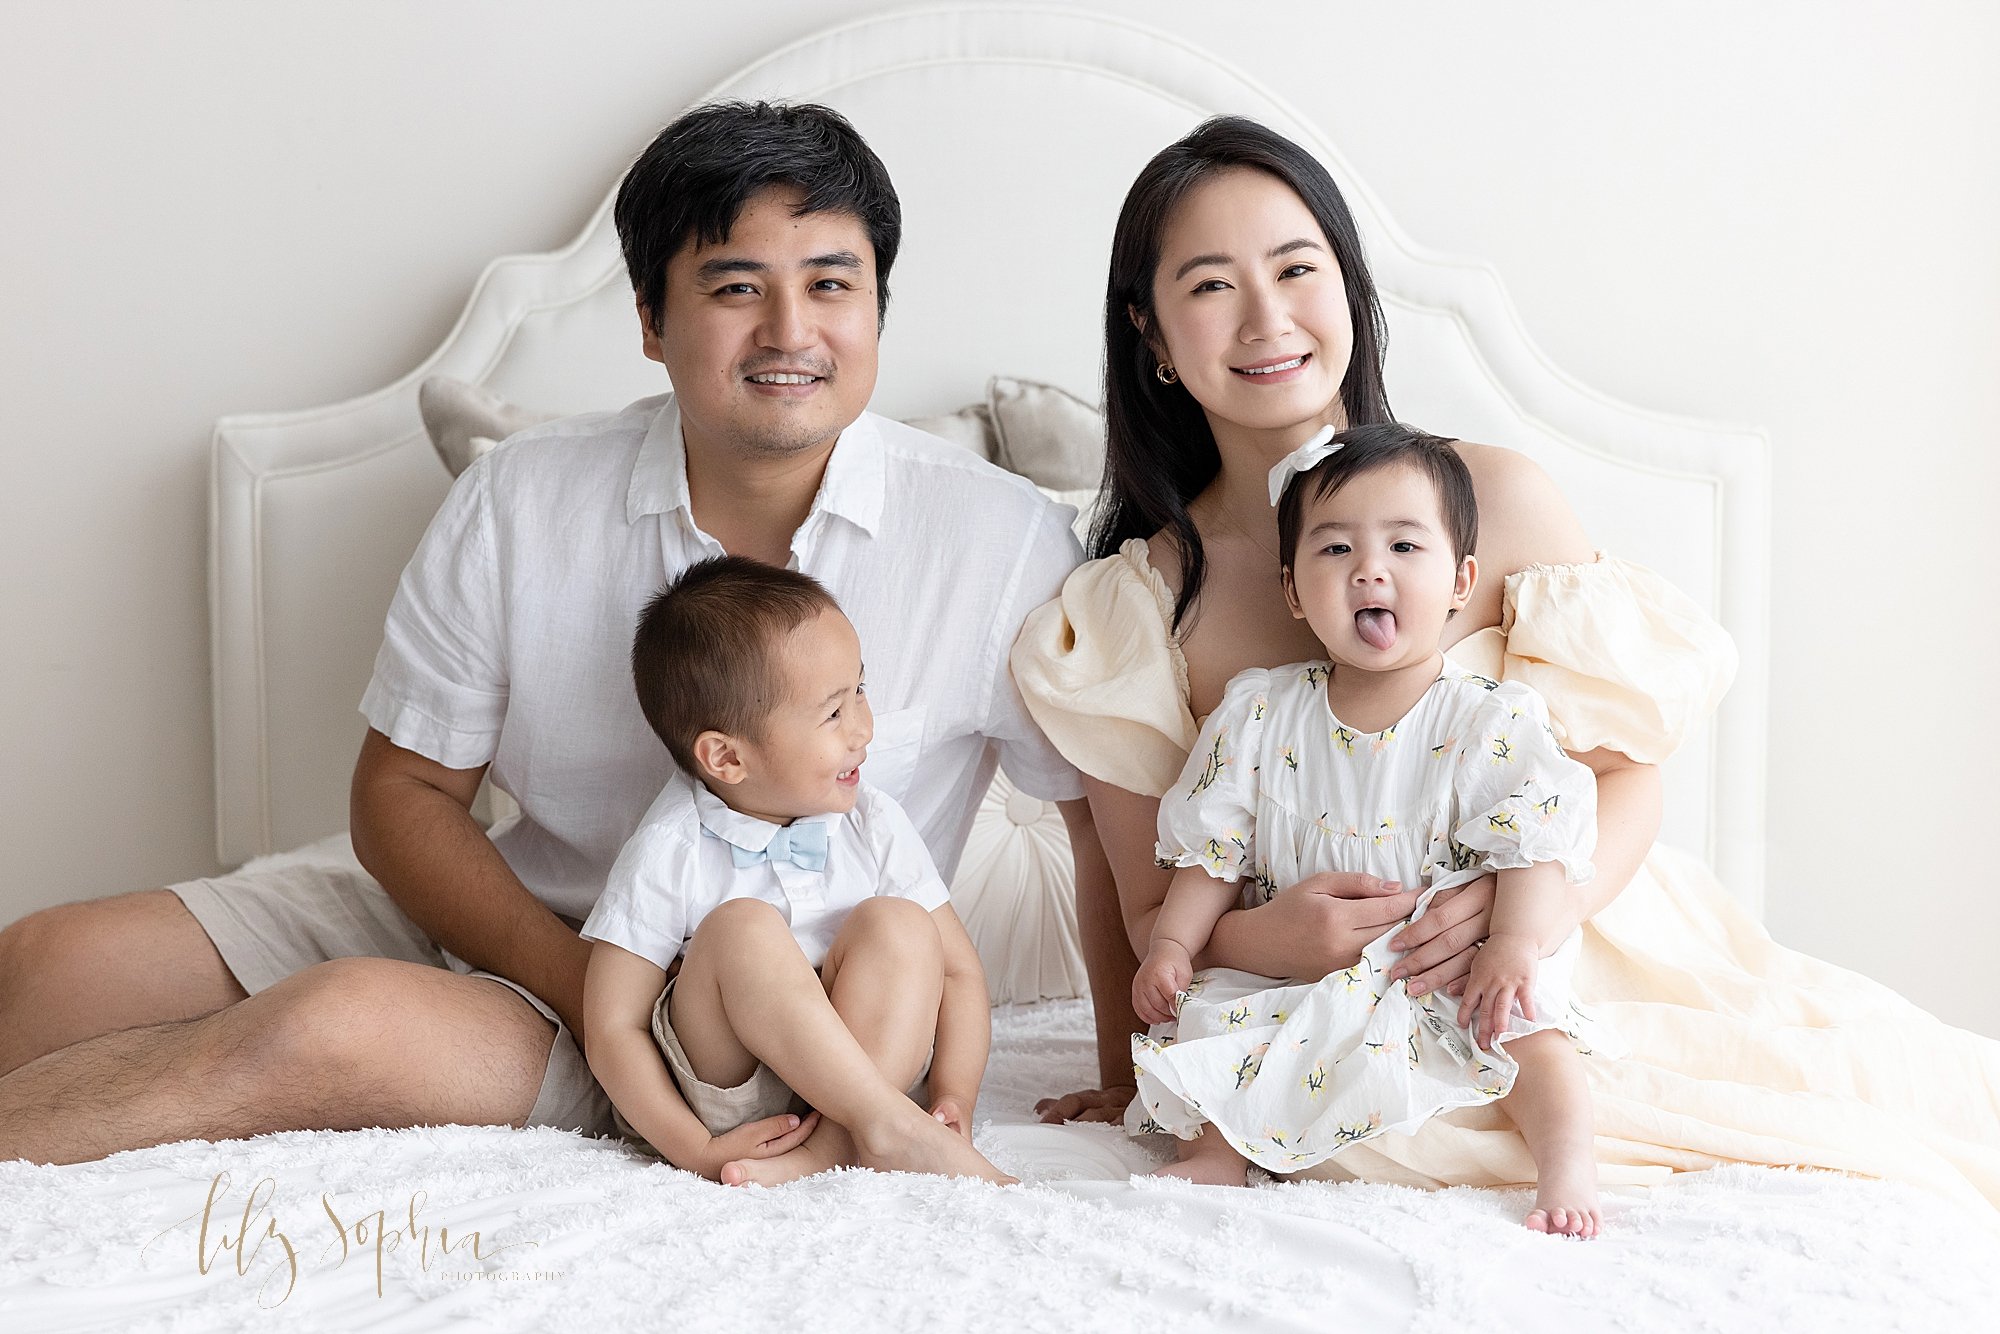  Fun family photo of an Asian father sitting on a bed with his toddler son in front of him watching his one year old sister who is sticking out her tongue as she sits on her mother’s lap next to them taken next to a window streaming natural light int